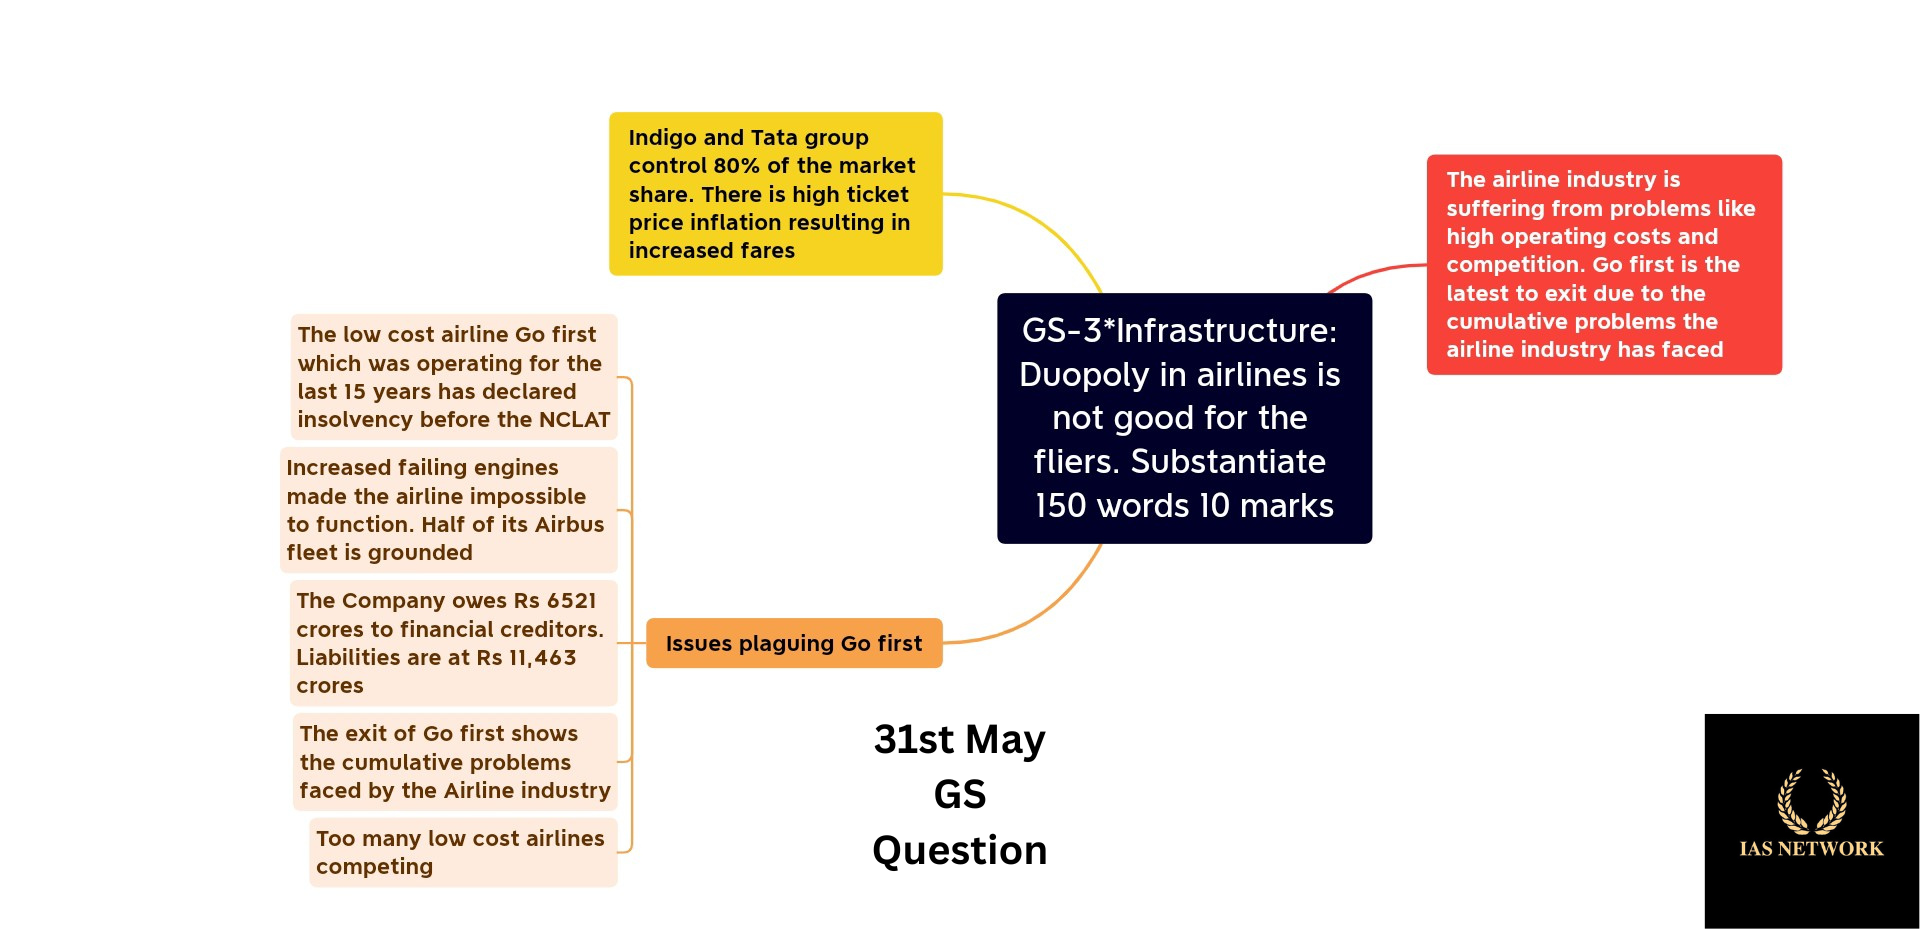 IAS NETWORK 31th MAY GS QUESTION